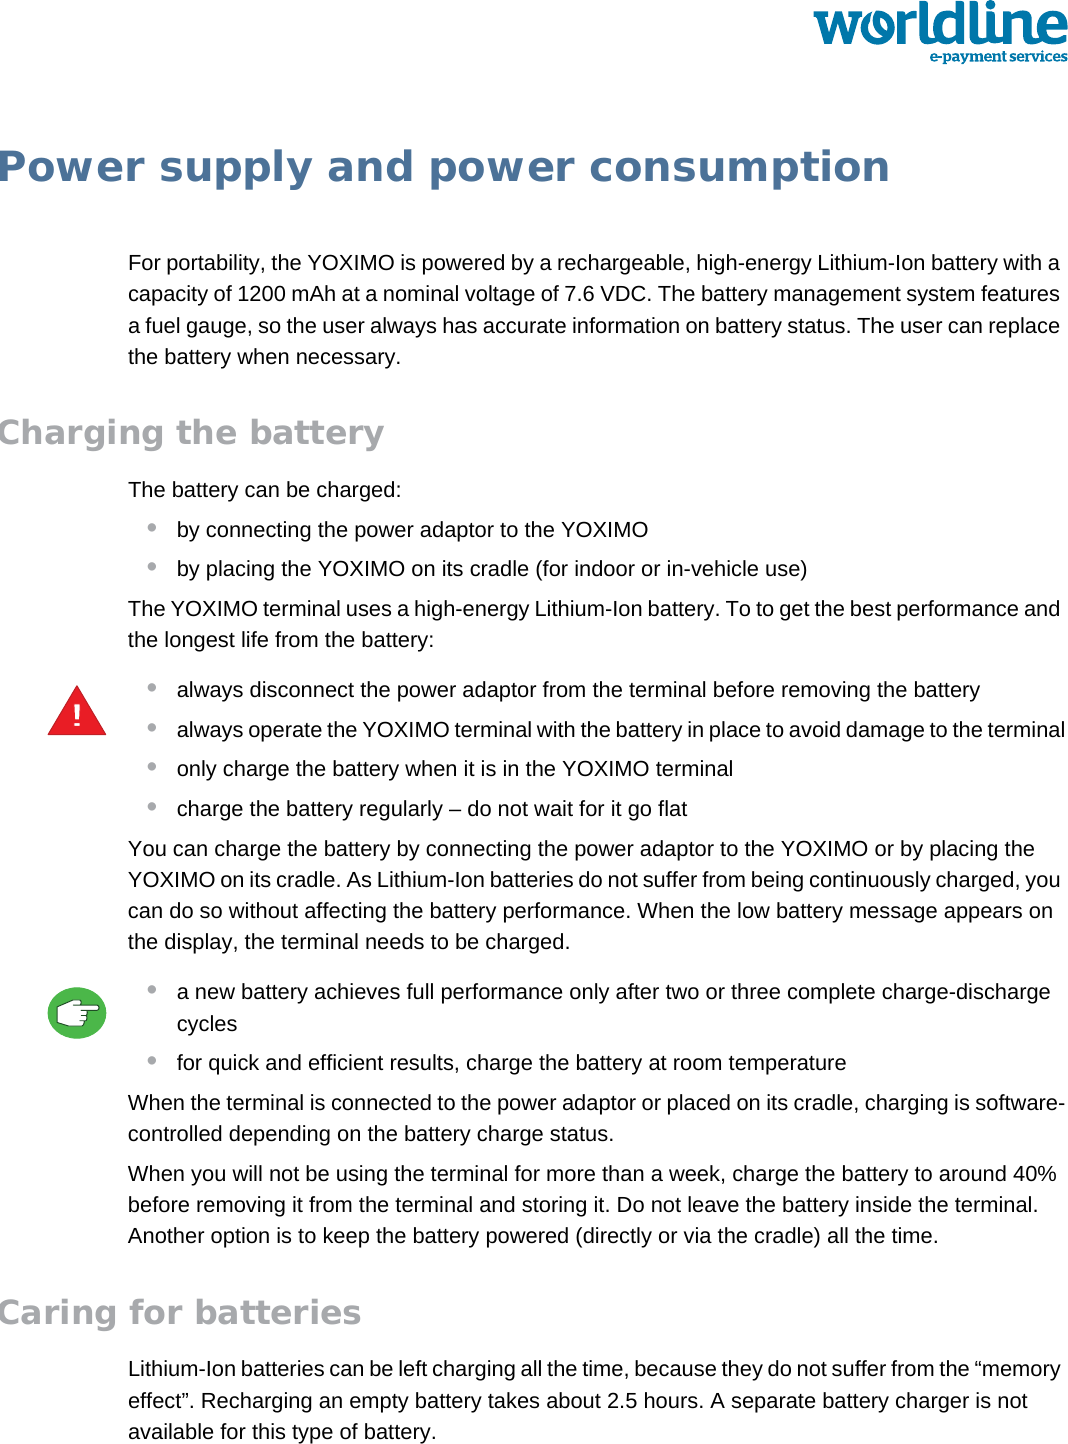 public 19om_yxm_powerSupply.fm document release 1.1 last updated 30/9/15Power supply and power consumptionFor portability, the YOXIMO is powered by a rechargeable, high-energy Lithium-Ion battery with a capacity of 1200 mAh at a nominal voltage of 7.6 VDC. The battery management system features a fuel gauge, so the user always has accurate information on battery status. The user can replace the battery when necessary.Charging the batteryThe battery can be charged:•by connecting the power adaptor to the YOXIMO•by placing the YOXIMO on its cradle (for indoor or in-vehicle use)The YOXIMO terminal uses a high-energy Lithium-Ion battery. To to get the best performance and the longest life from the battery:•always disconnect the power adaptor from the terminal before removing the battery•always operate the YOXIMO terminal with the battery in place to avoid damage to the terminal•only charge the battery when it is in the YOXIMO terminal•charge the battery regularly – do not wait for it go flatYou can charge the battery by connecting the power adaptor to the YOXIMO or by placing the YOXIMO on its cradle. As Lithium-Ion batteries do not suffer from being continuously charged, you can do so without affecting the battery performance. When the low battery message appears on the display, the terminal needs to be charged.•a new battery achieves full performance only after two or three complete charge-discharge cycles•for quick and efficient results, charge the battery at room temperatureWhen the terminal is connected to the power adaptor or placed on its cradle, charging is software-controlled depending on the battery charge status.When you will not be using the terminal for more than a week, charge the battery to around 40% before removing it from the terminal and storing it. Do not leave the battery inside the terminal. Another option is to keep the battery powered (directly or via the cradle) all the time.Caring for batteriesLithium-Ion batteries can be left charging all the time, because they do not suffer from the “memory effect”. Recharging an empty battery takes about 2.5 hours. A separate battery charger is not available for this type of battery.!